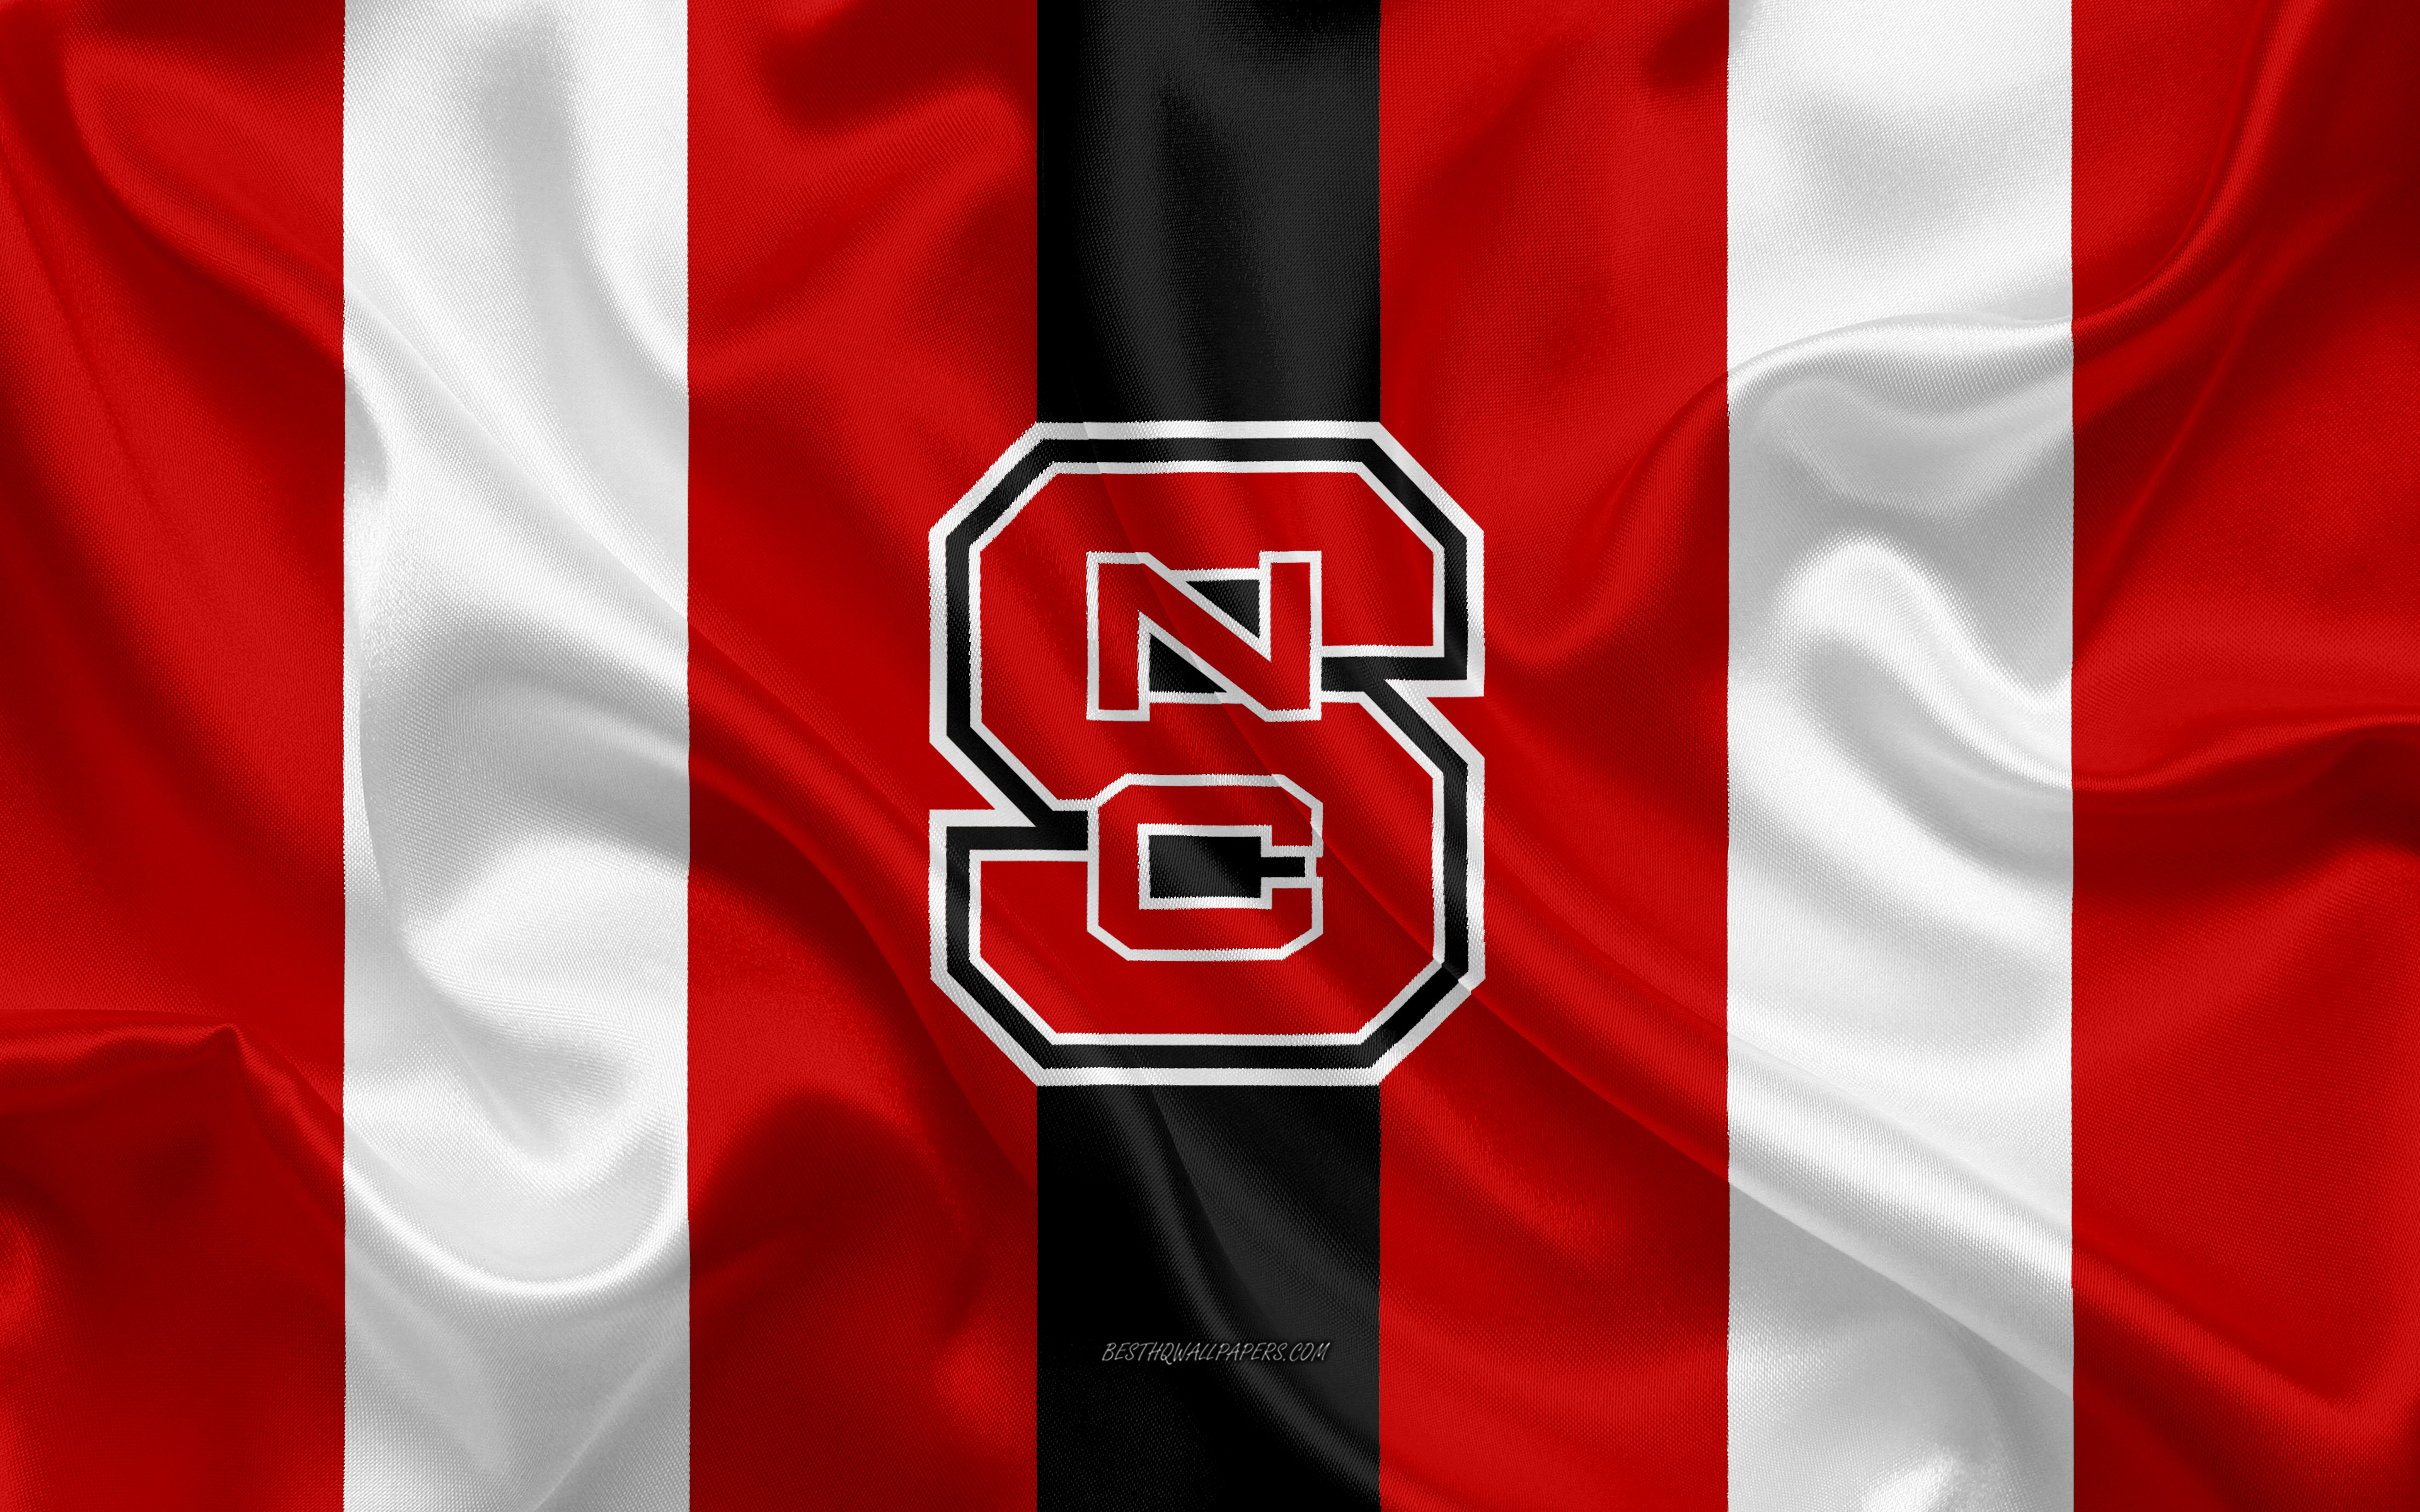 Download Wallpaper NC State Wolfpack, American Football Team, Emblem, Silk Flag, Red Black Silk Texture, NCAA, NC State Wolfpack Logo, Raleigh, North Carolina, USA, American Football For Desktop With Resolution 3840x2400. High Quality